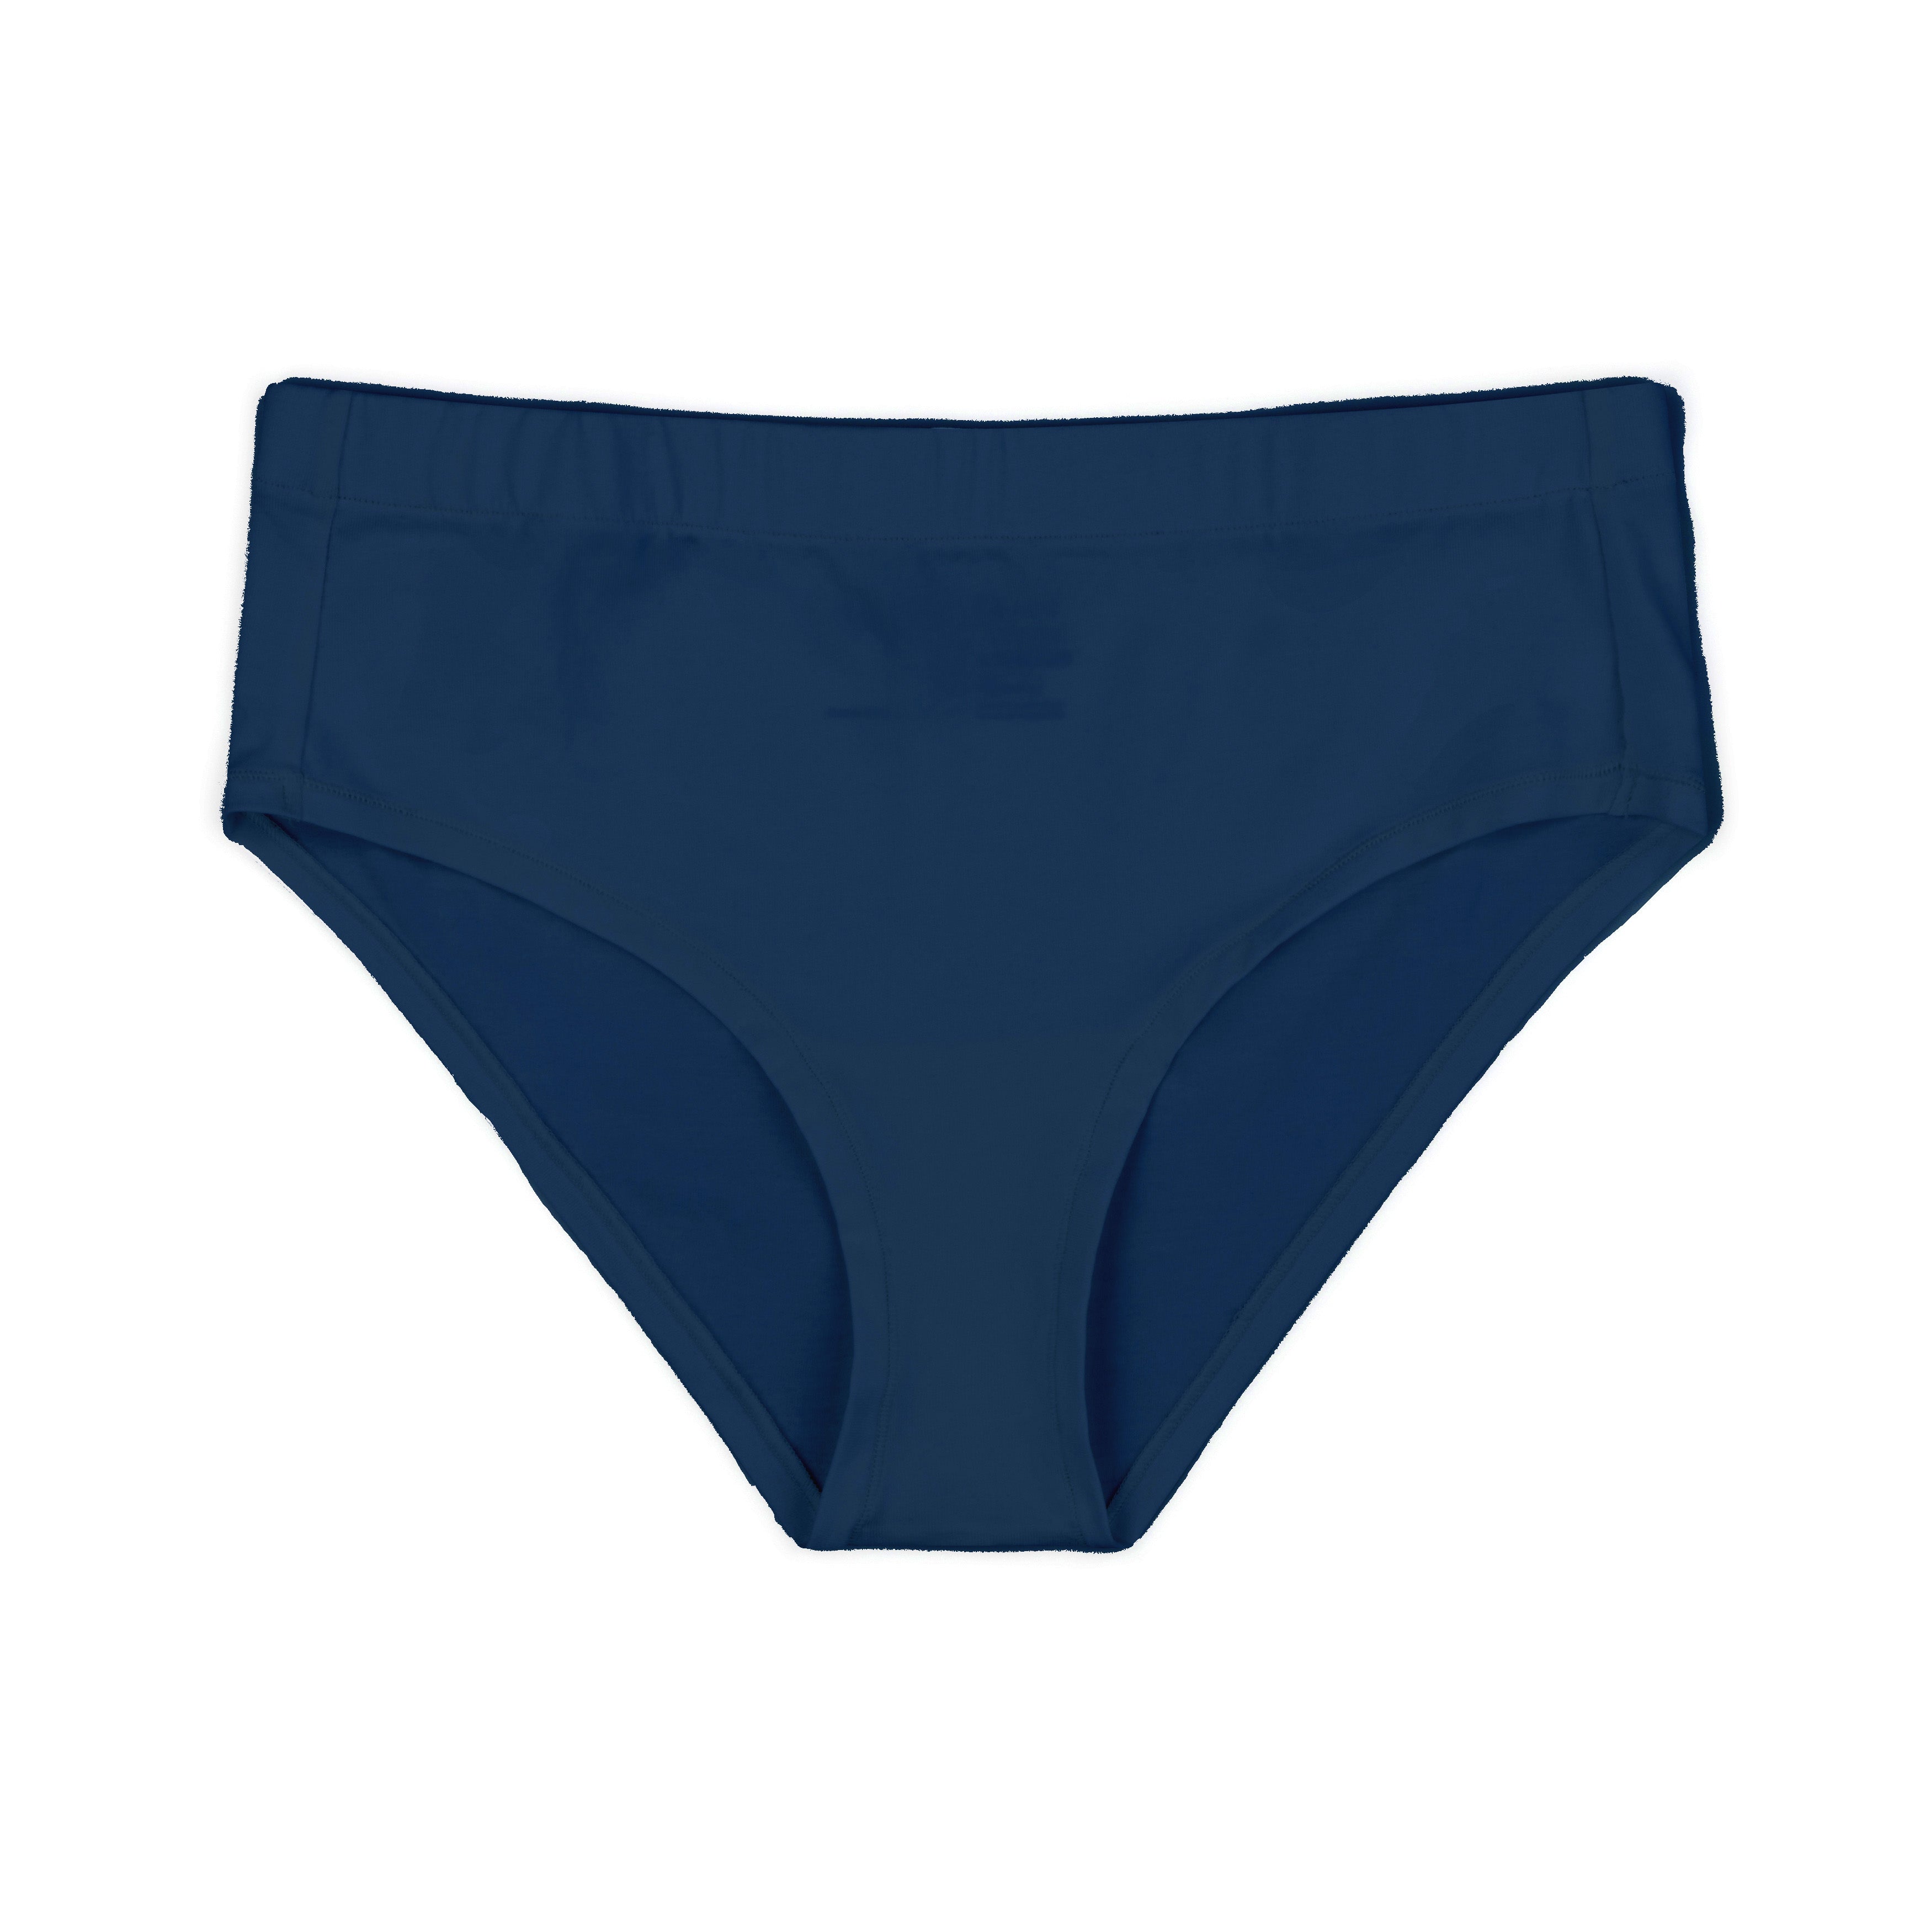 ONE Essentials Navy High rise briefs in organic and recycled cotton, ethical underwear